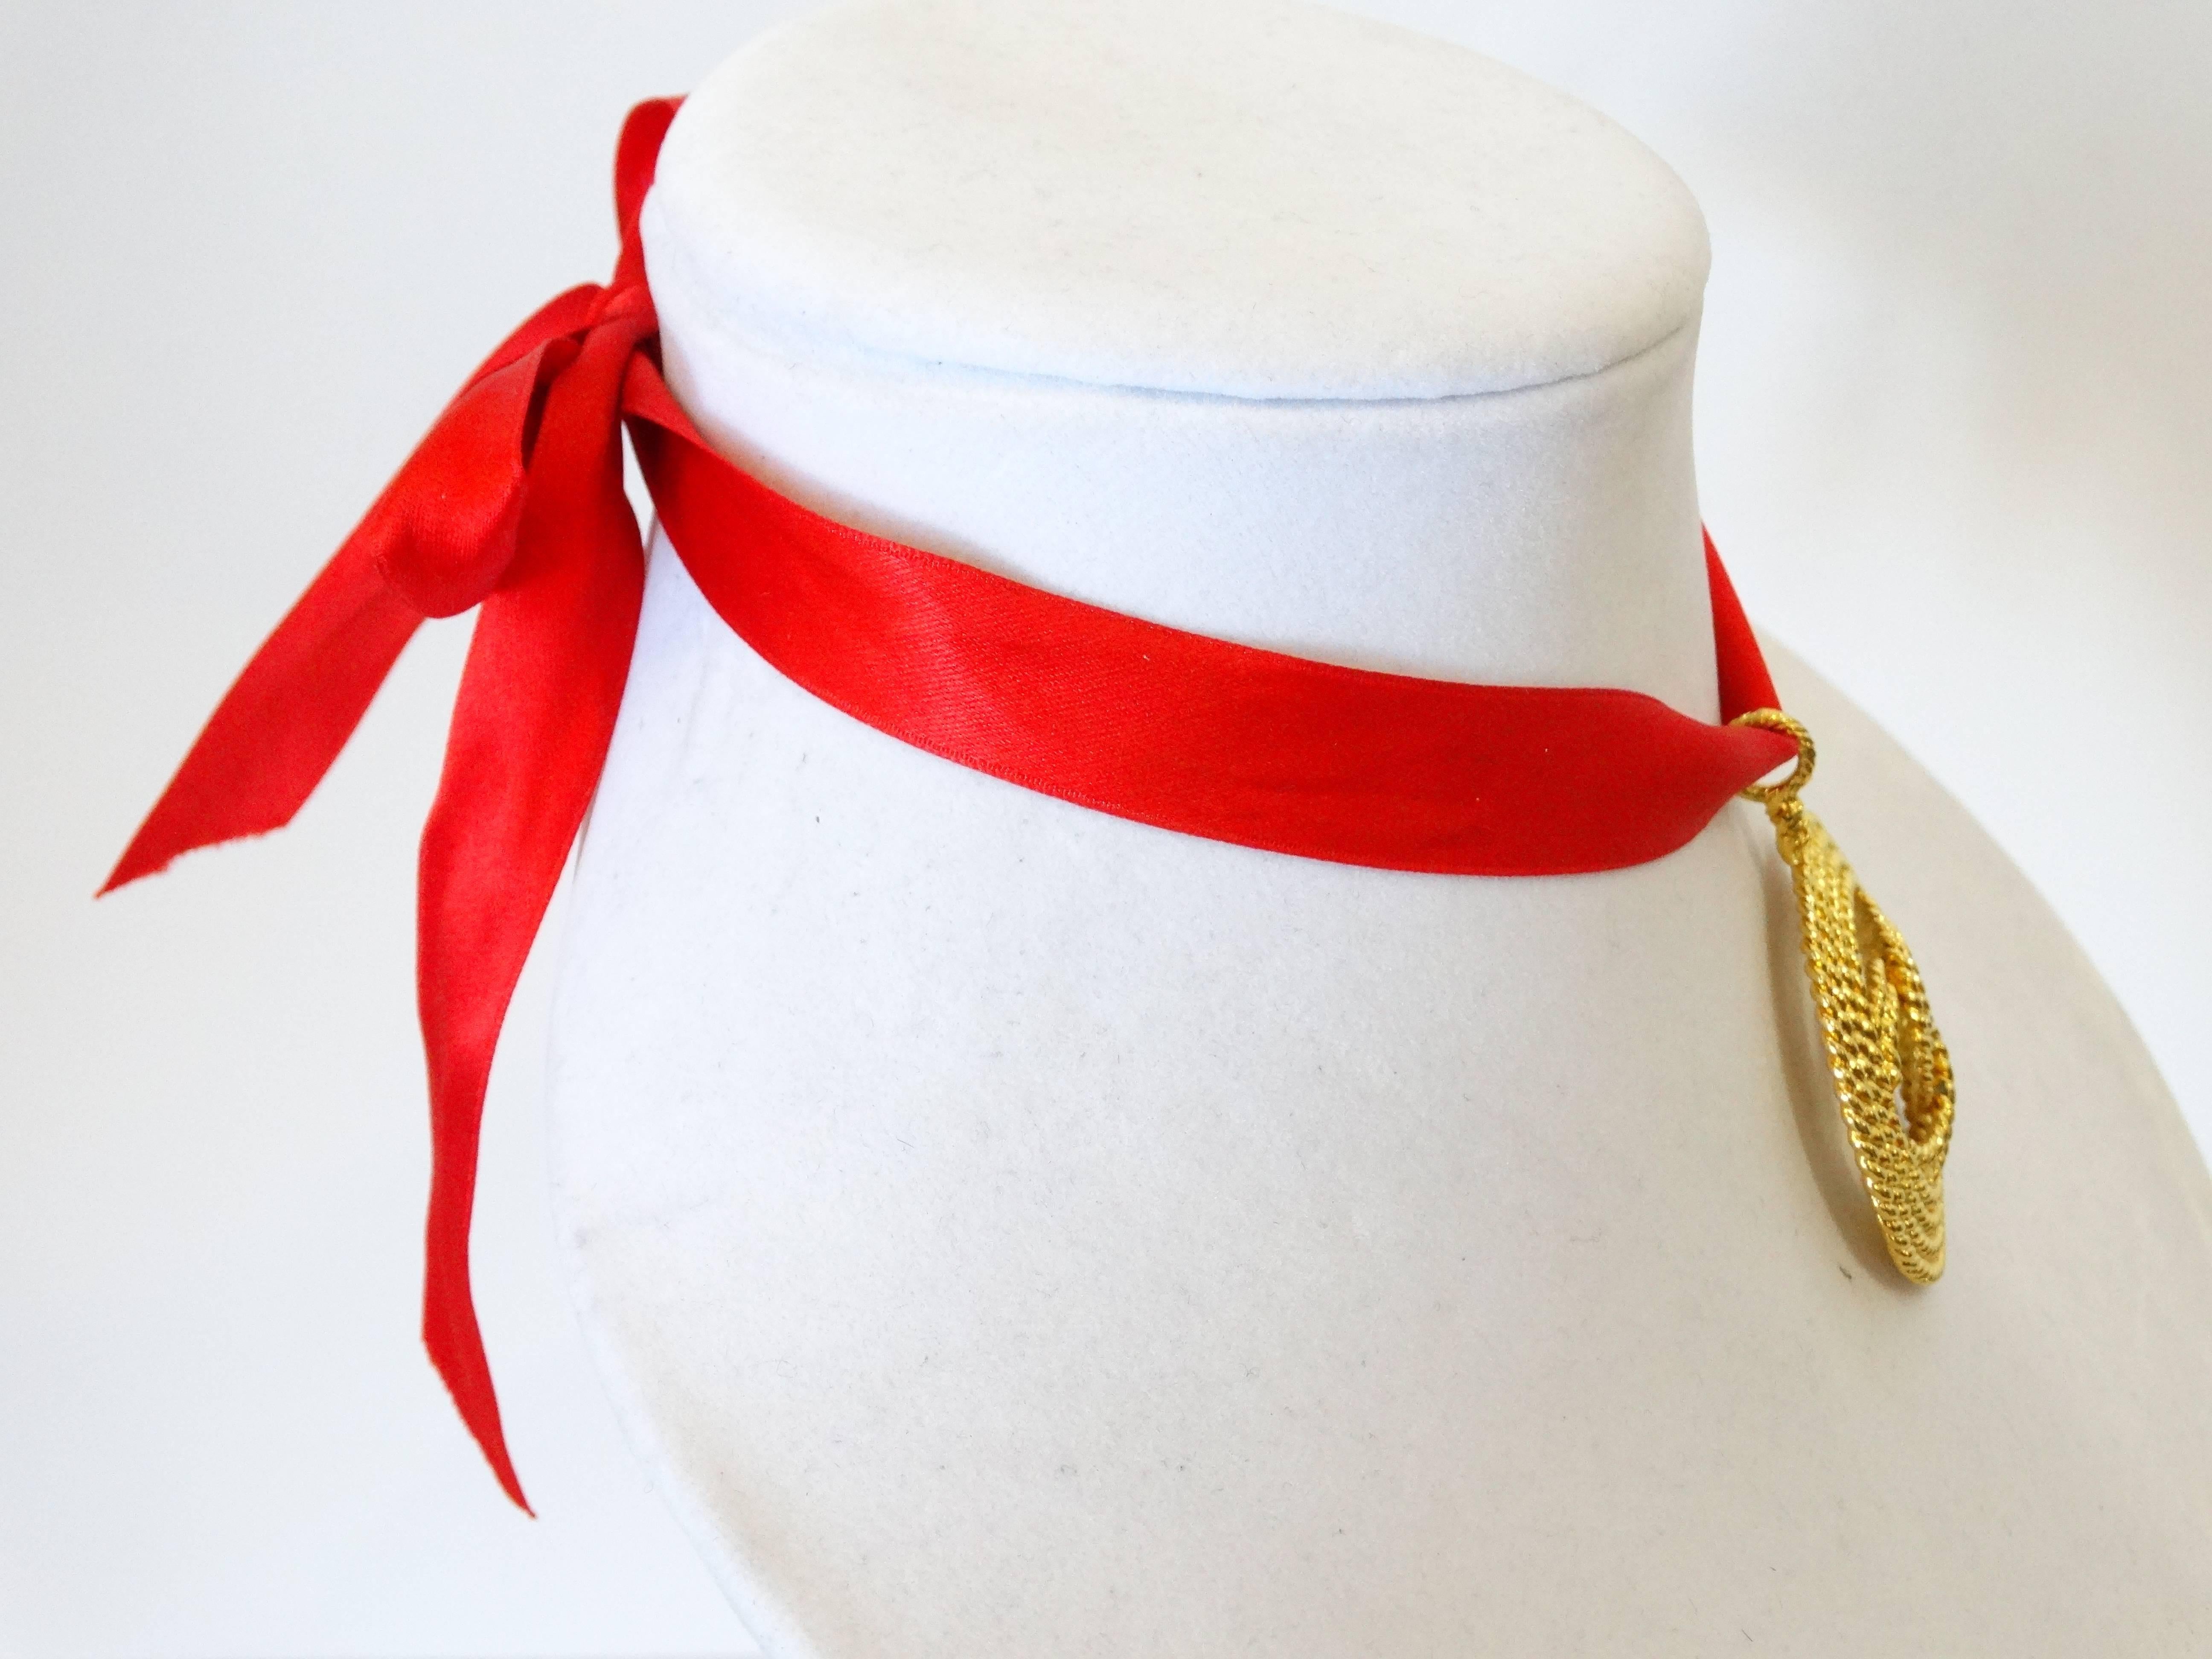 A classic pendent necklace worn as a chocker designed by Karl Lagerfeld for Chanel. Large plated gold medallion with large center CC, pendent is in a rope design. Chanel Made in France signed 2 8 red silk ribbon was added. You can request any color